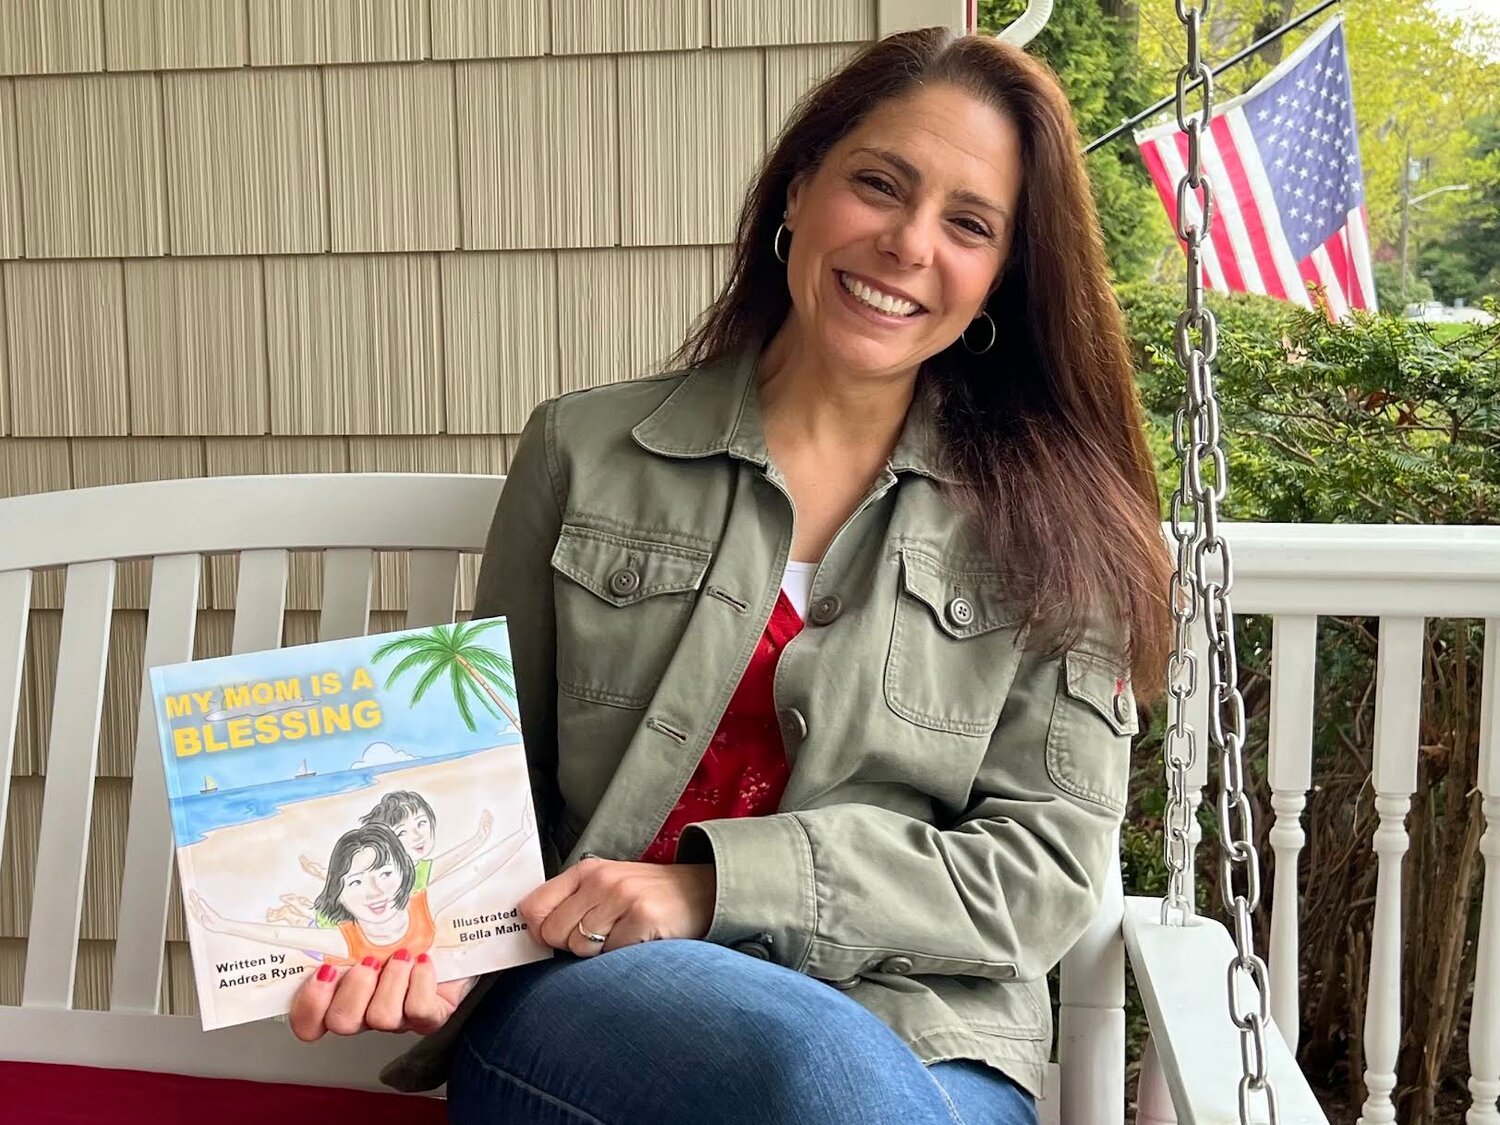 Author Andrea Ryan of the Lighthouse Mission in Bellport holds her freshly published children’s book, “My Mom is a Blessing.”